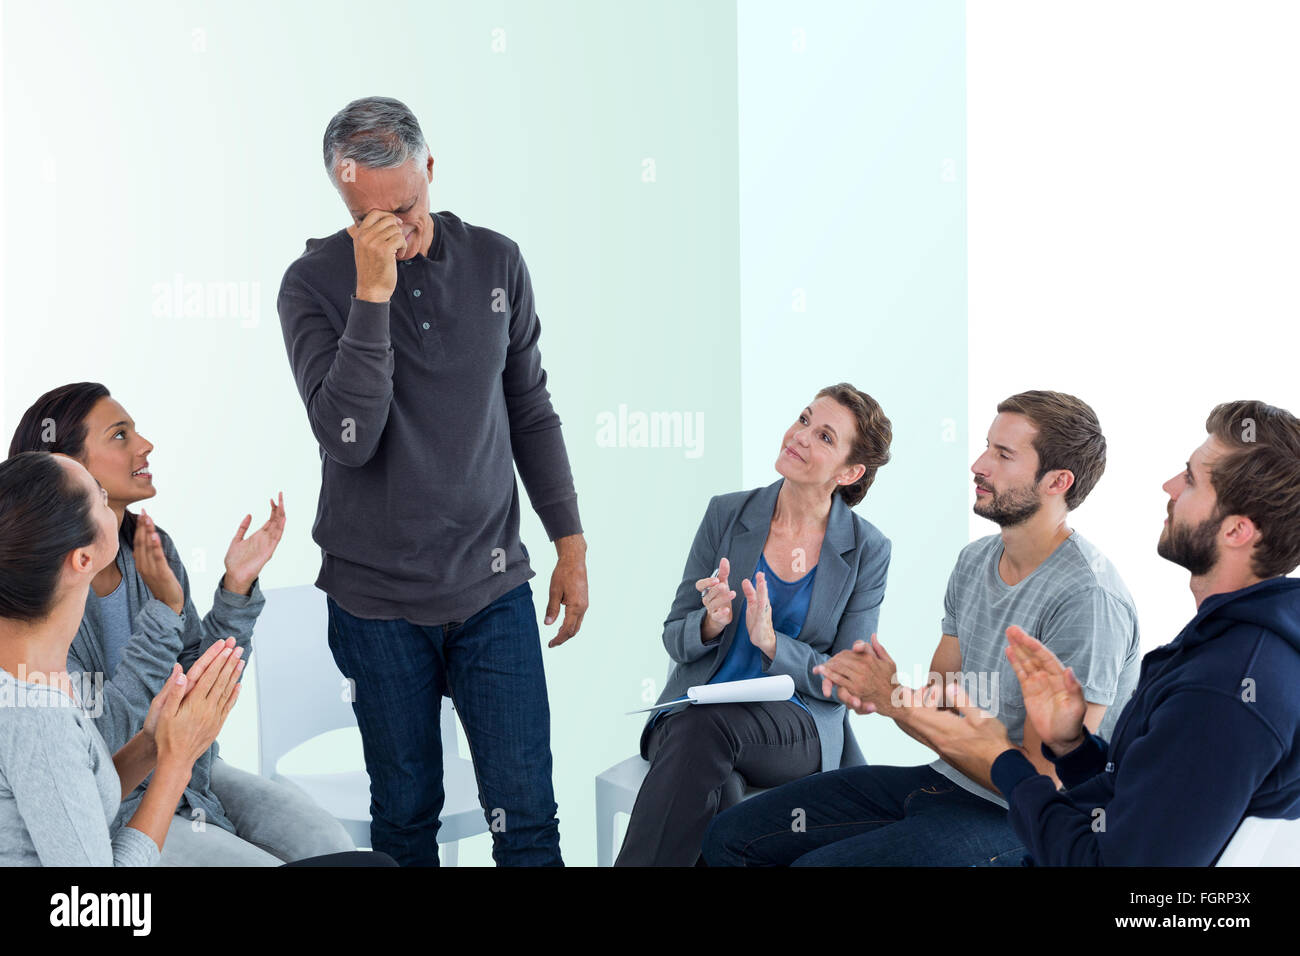 Composite image of rehab group applauding delighted man standing up Stock Photo